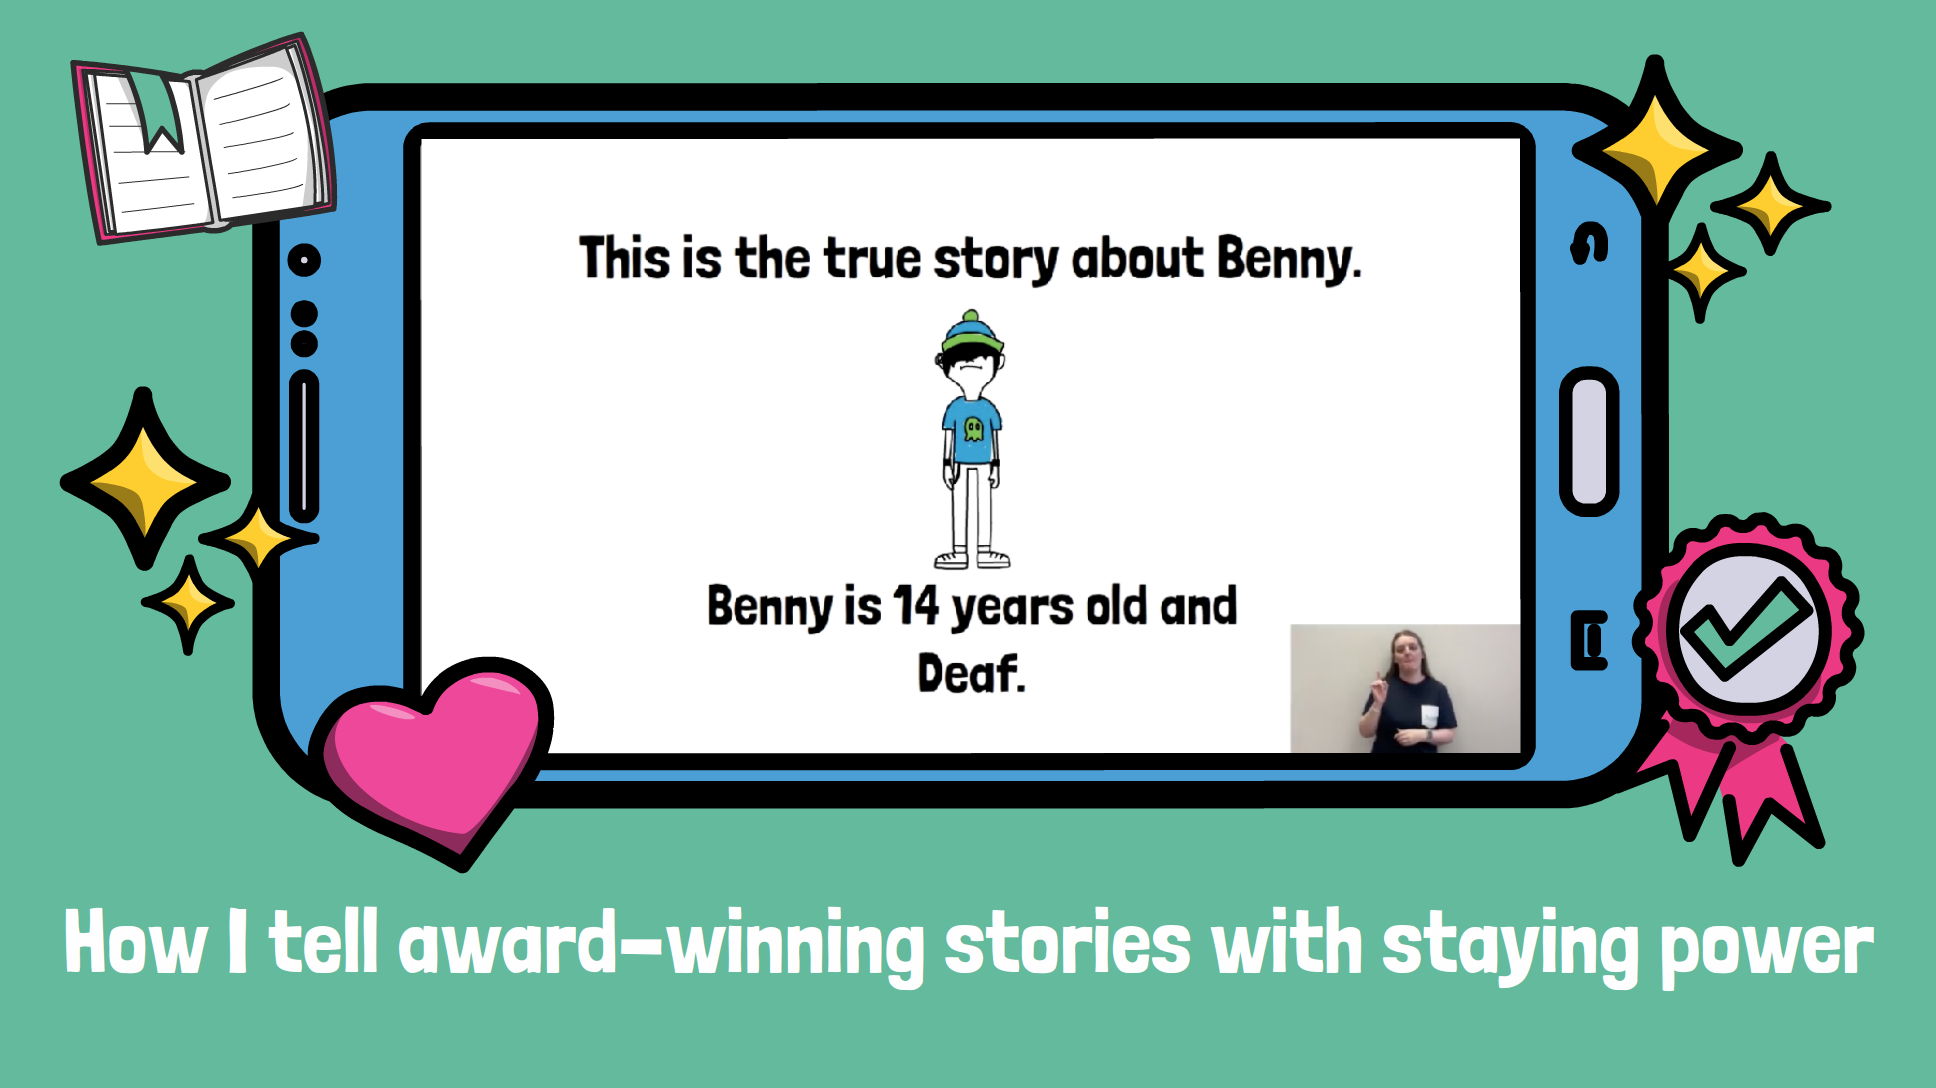 How I tell award-winning stories with staying power